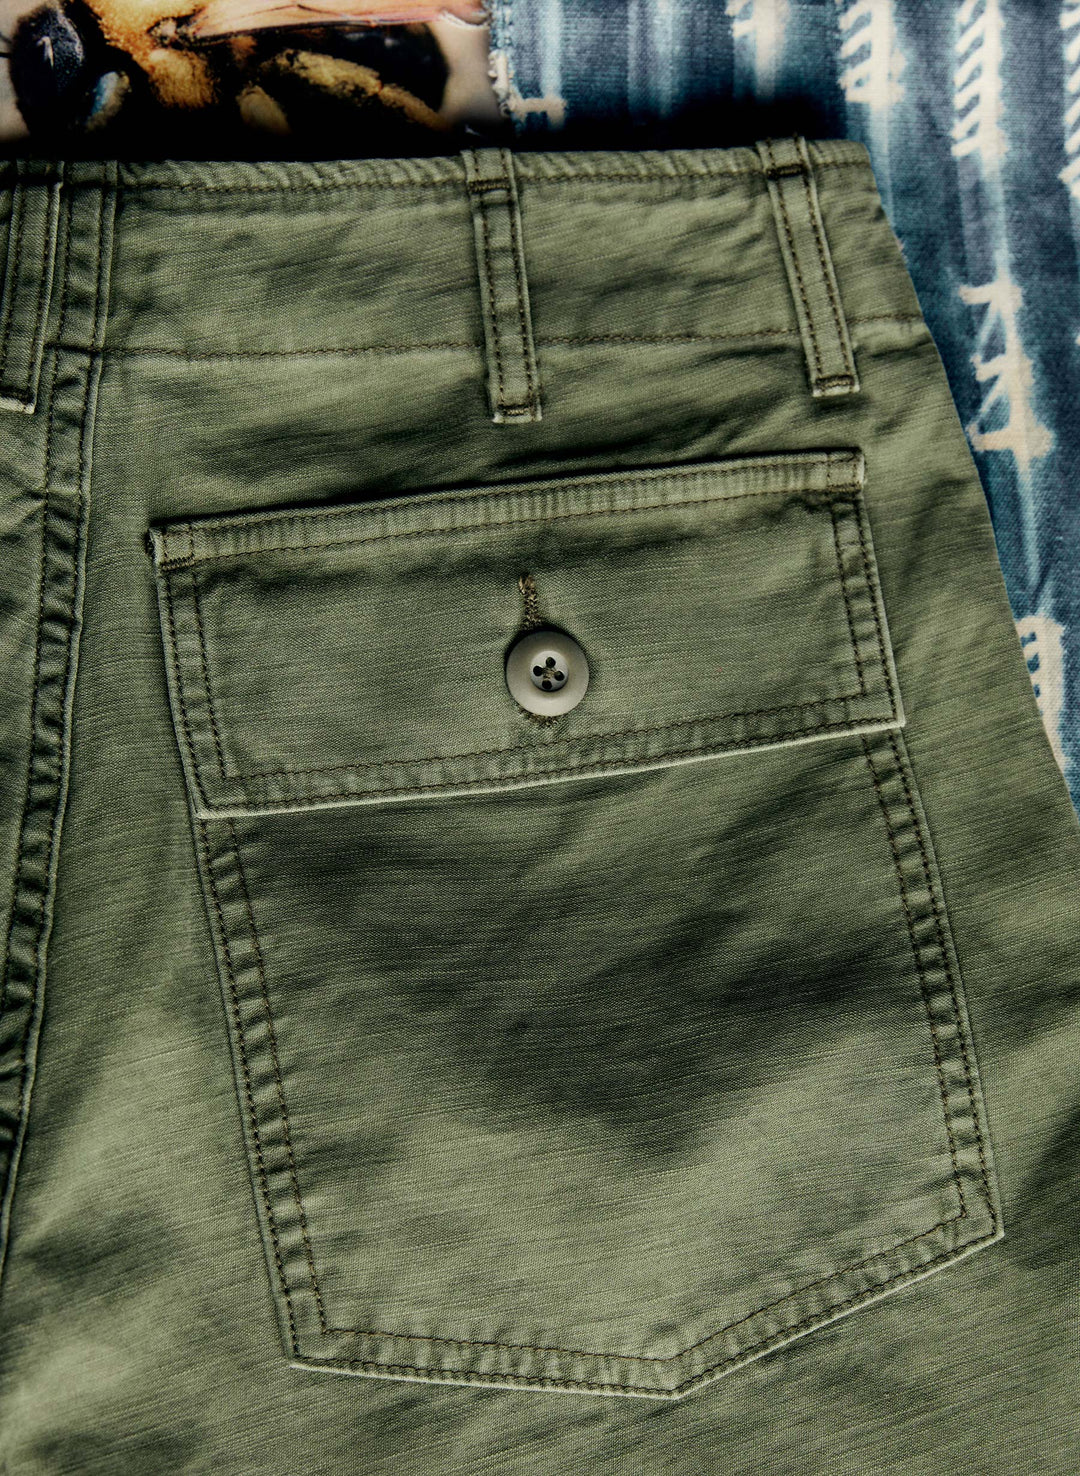 a pocket on a pair of pants